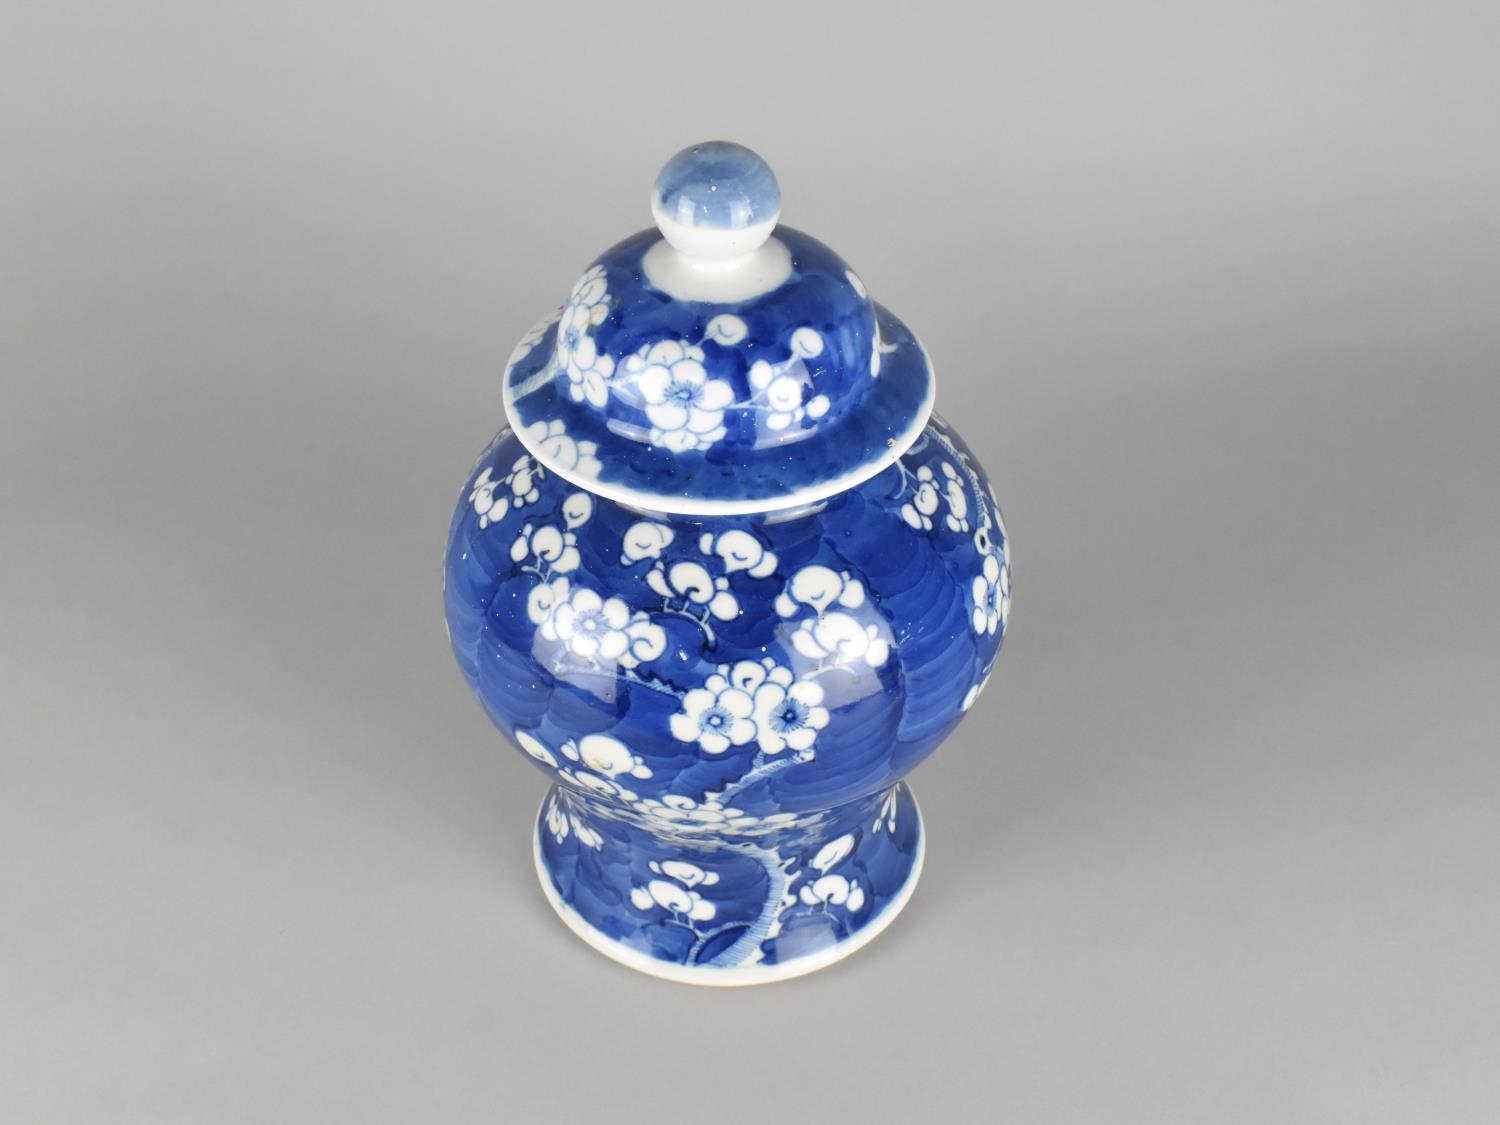 A Chinese Late Qing Dynasty Porcelain Blue and White Prunus Pattern Jar and Cover, Four Character - Image 2 of 4